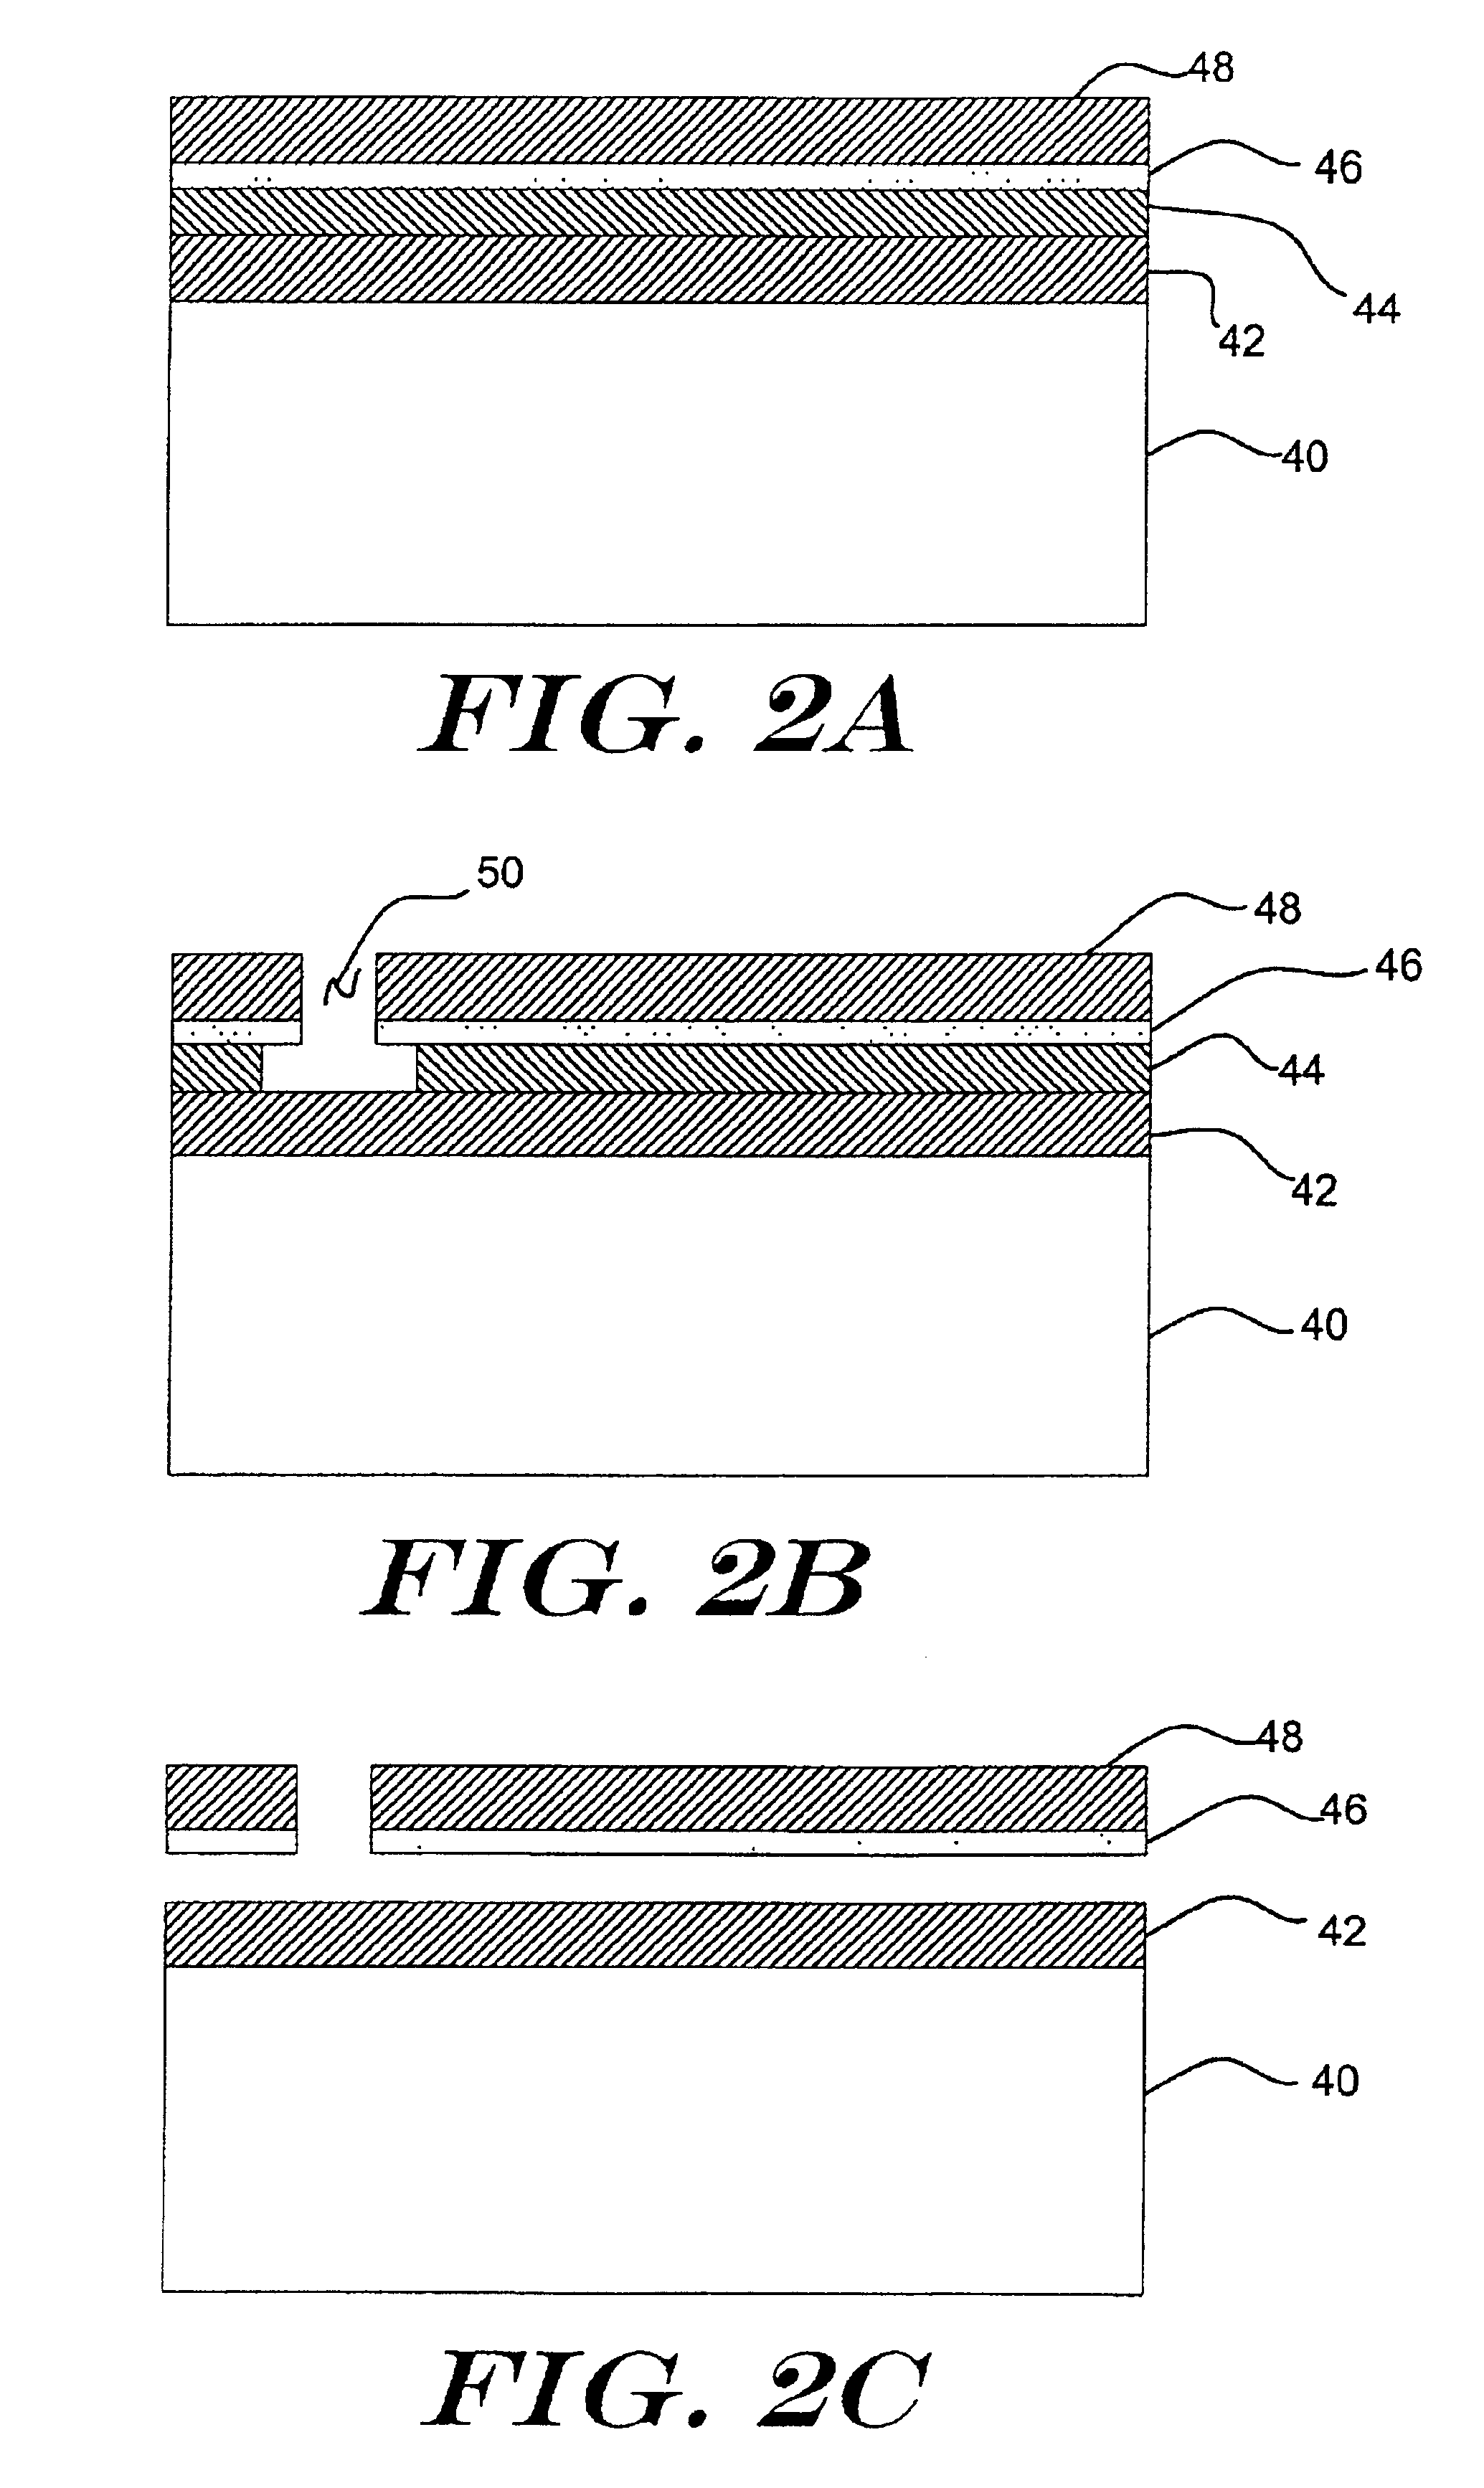 Use of an organic dielectric as a sacrificial layer